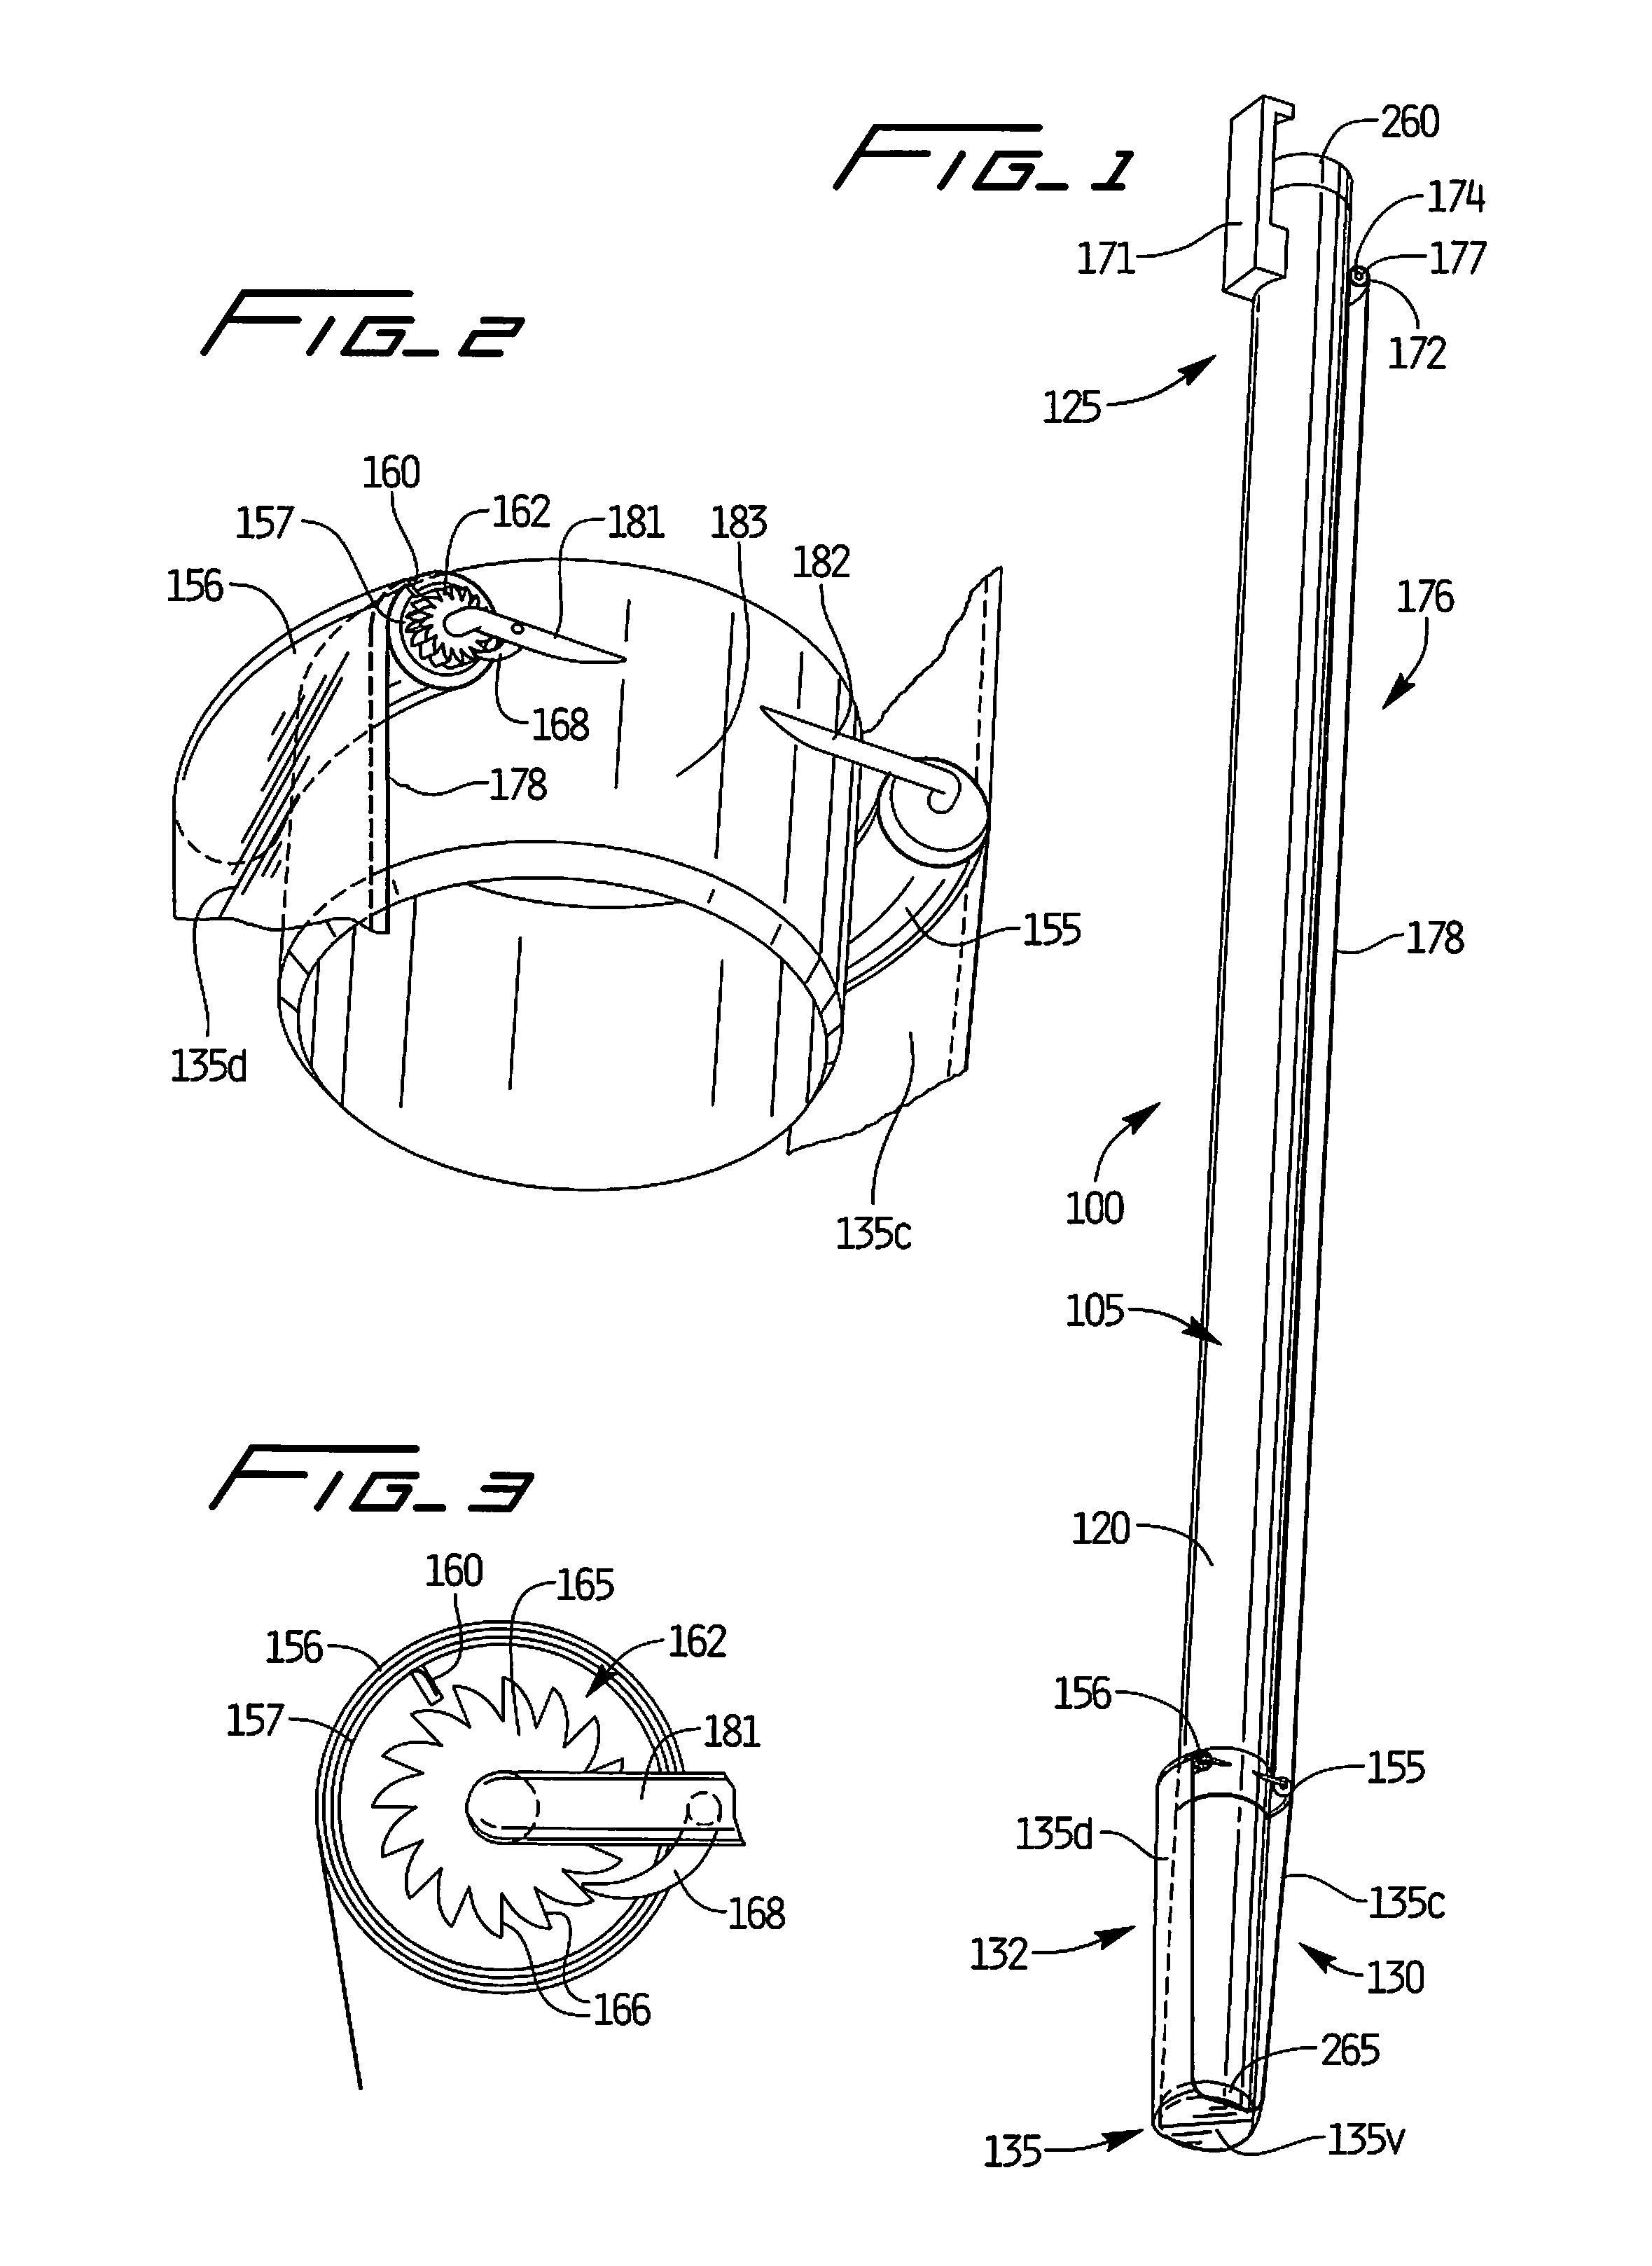 Covering Apparatus For An Endoscope Lens